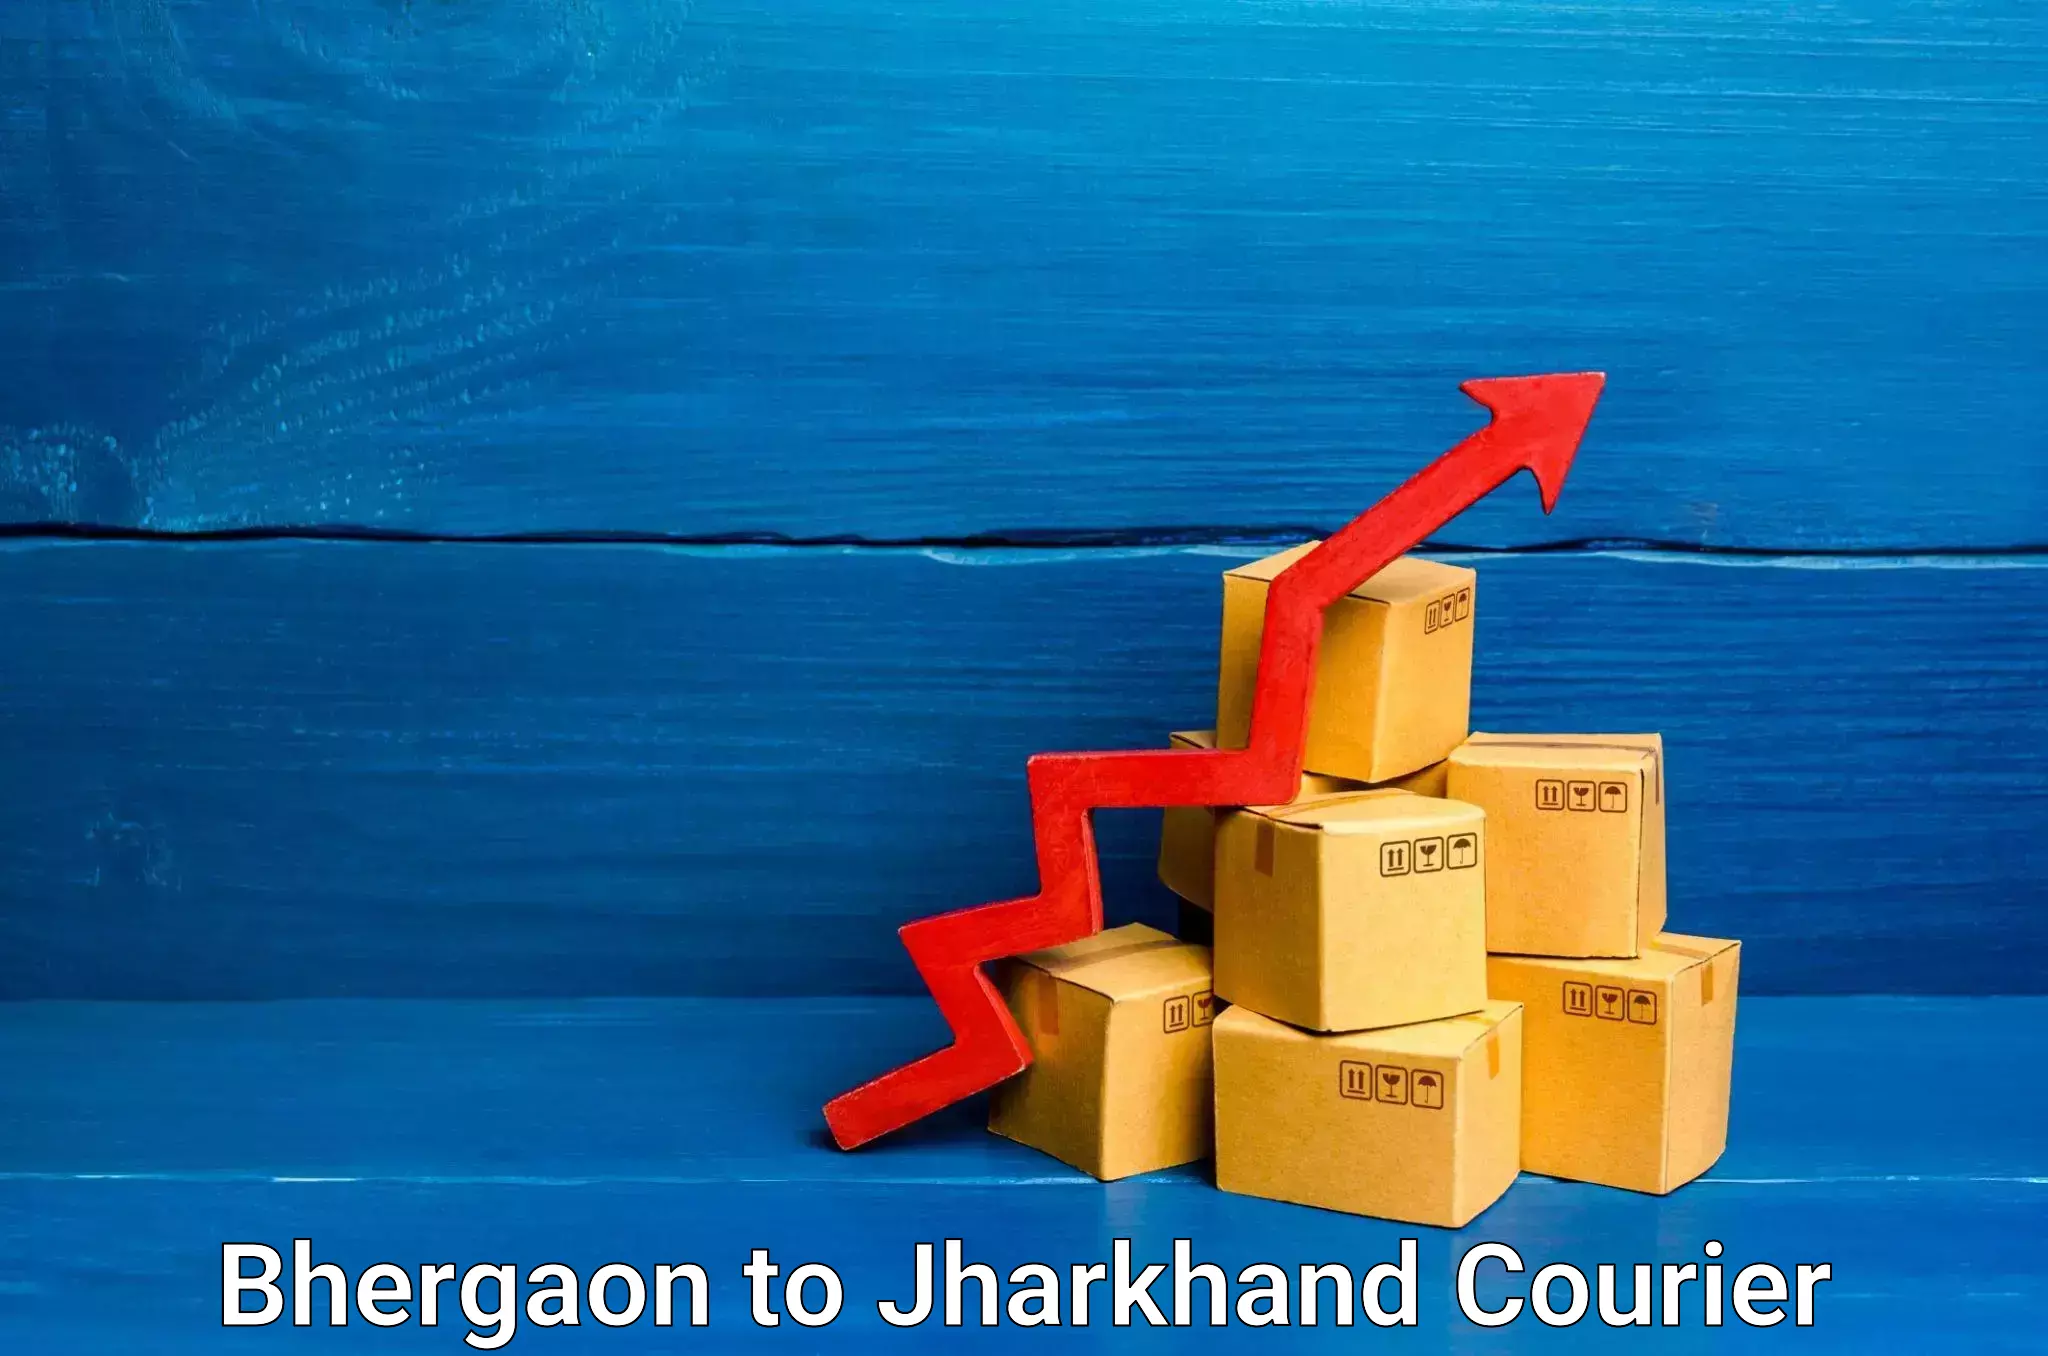 Premium delivery services Bhergaon to Dhanbad